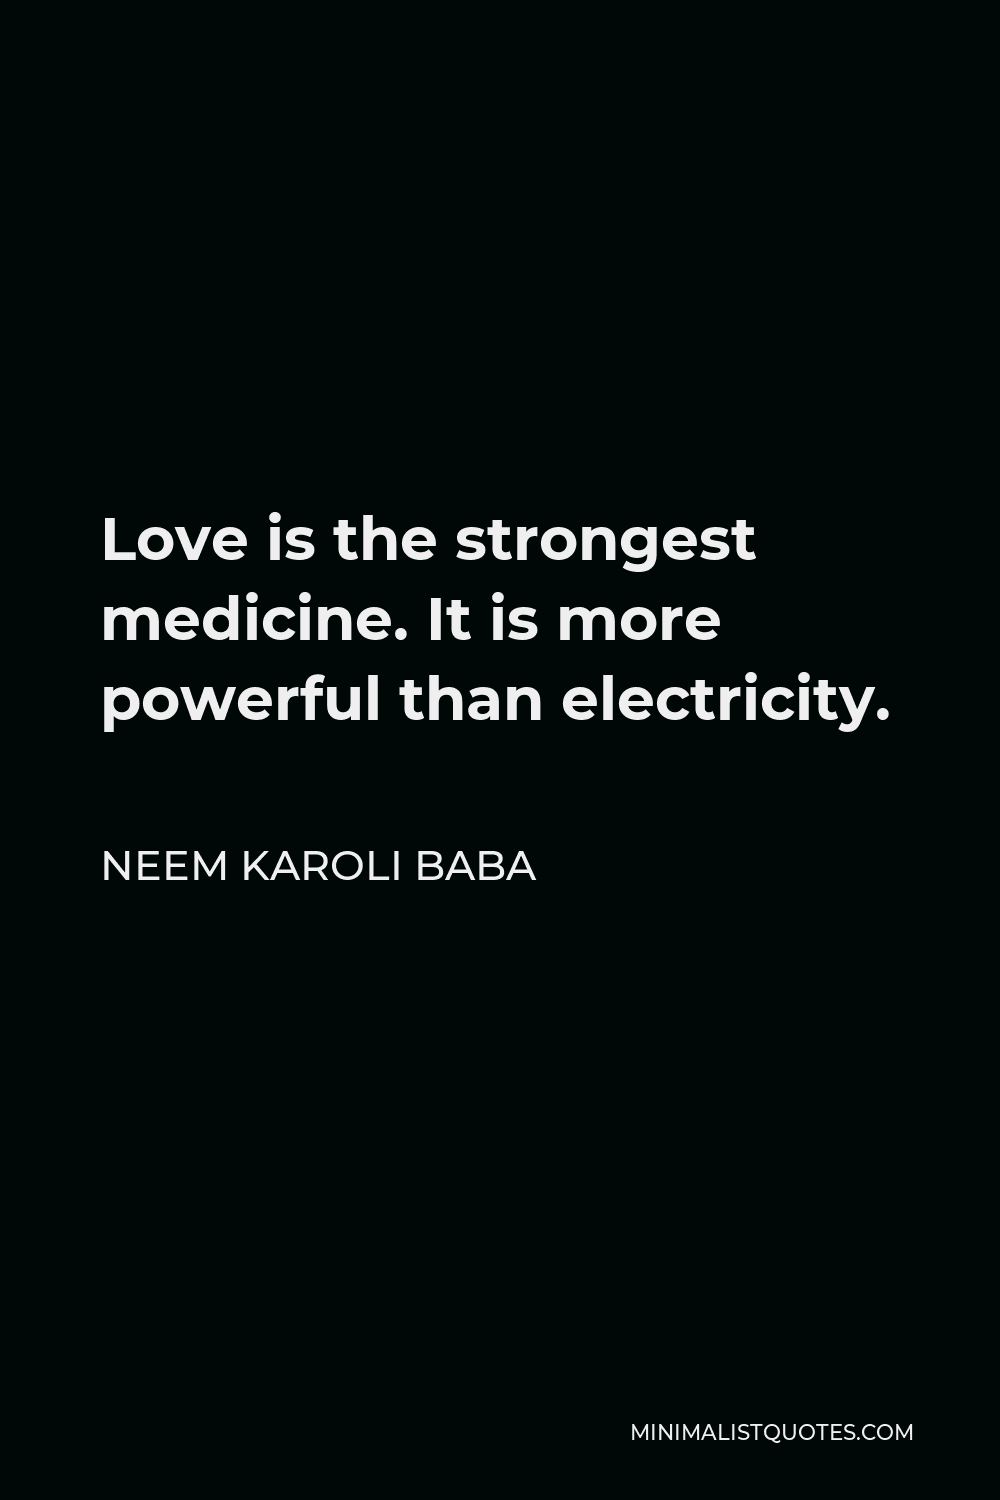 Neem Karoli Baba Quote - Love is the strongest medicine. It is more powerful than electricity.